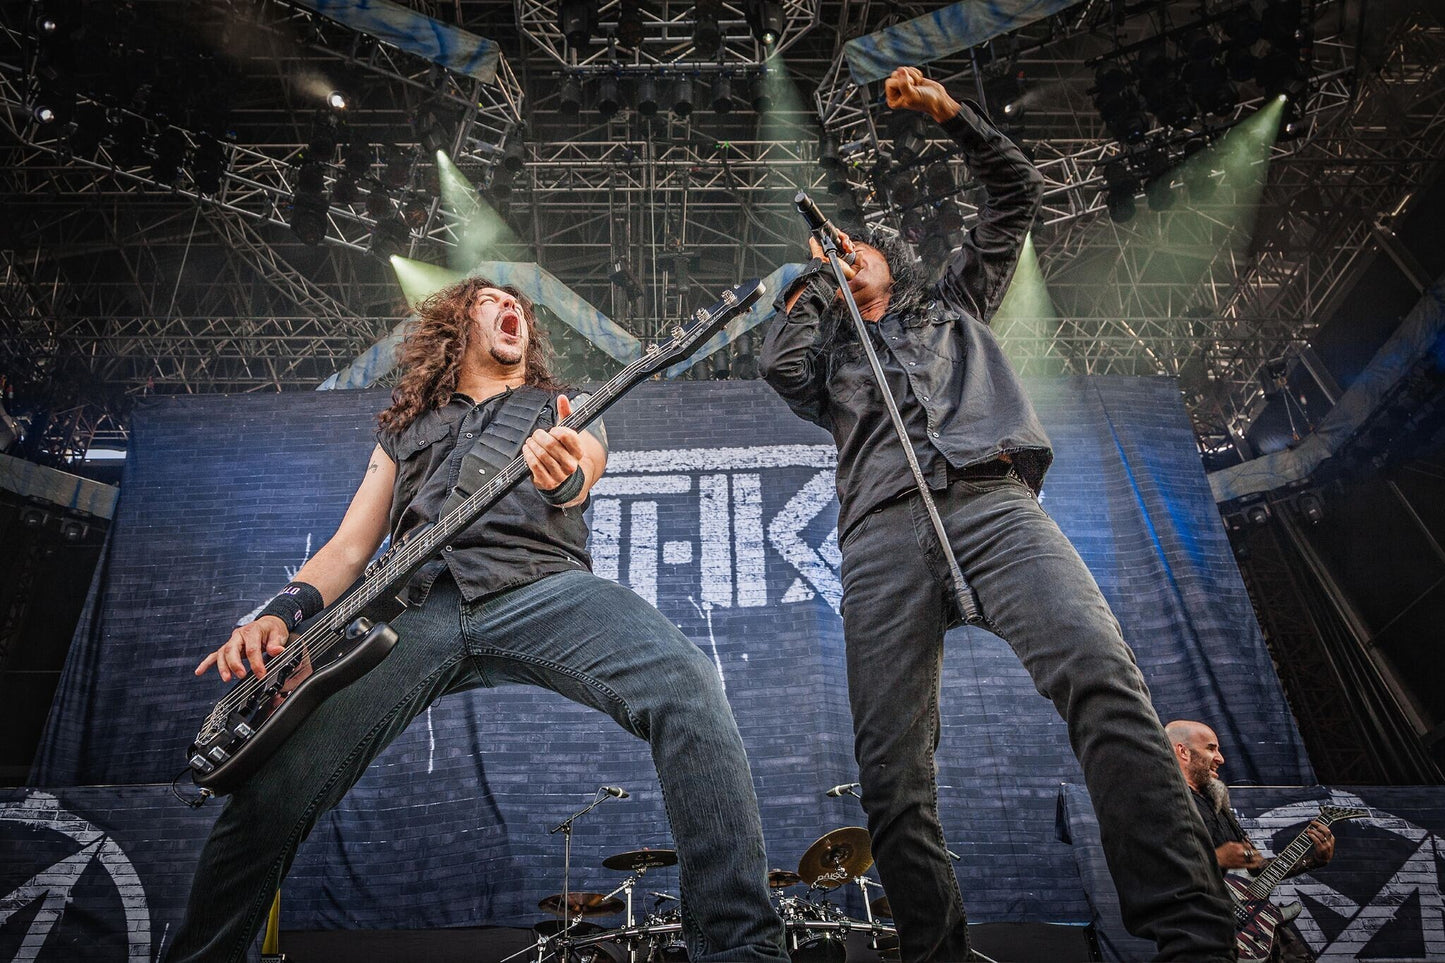 Anthrax - Band on Stage with Banner Backdrop Live at Copenhell Metal festival in Copenhagen Denmark 2014 Poster